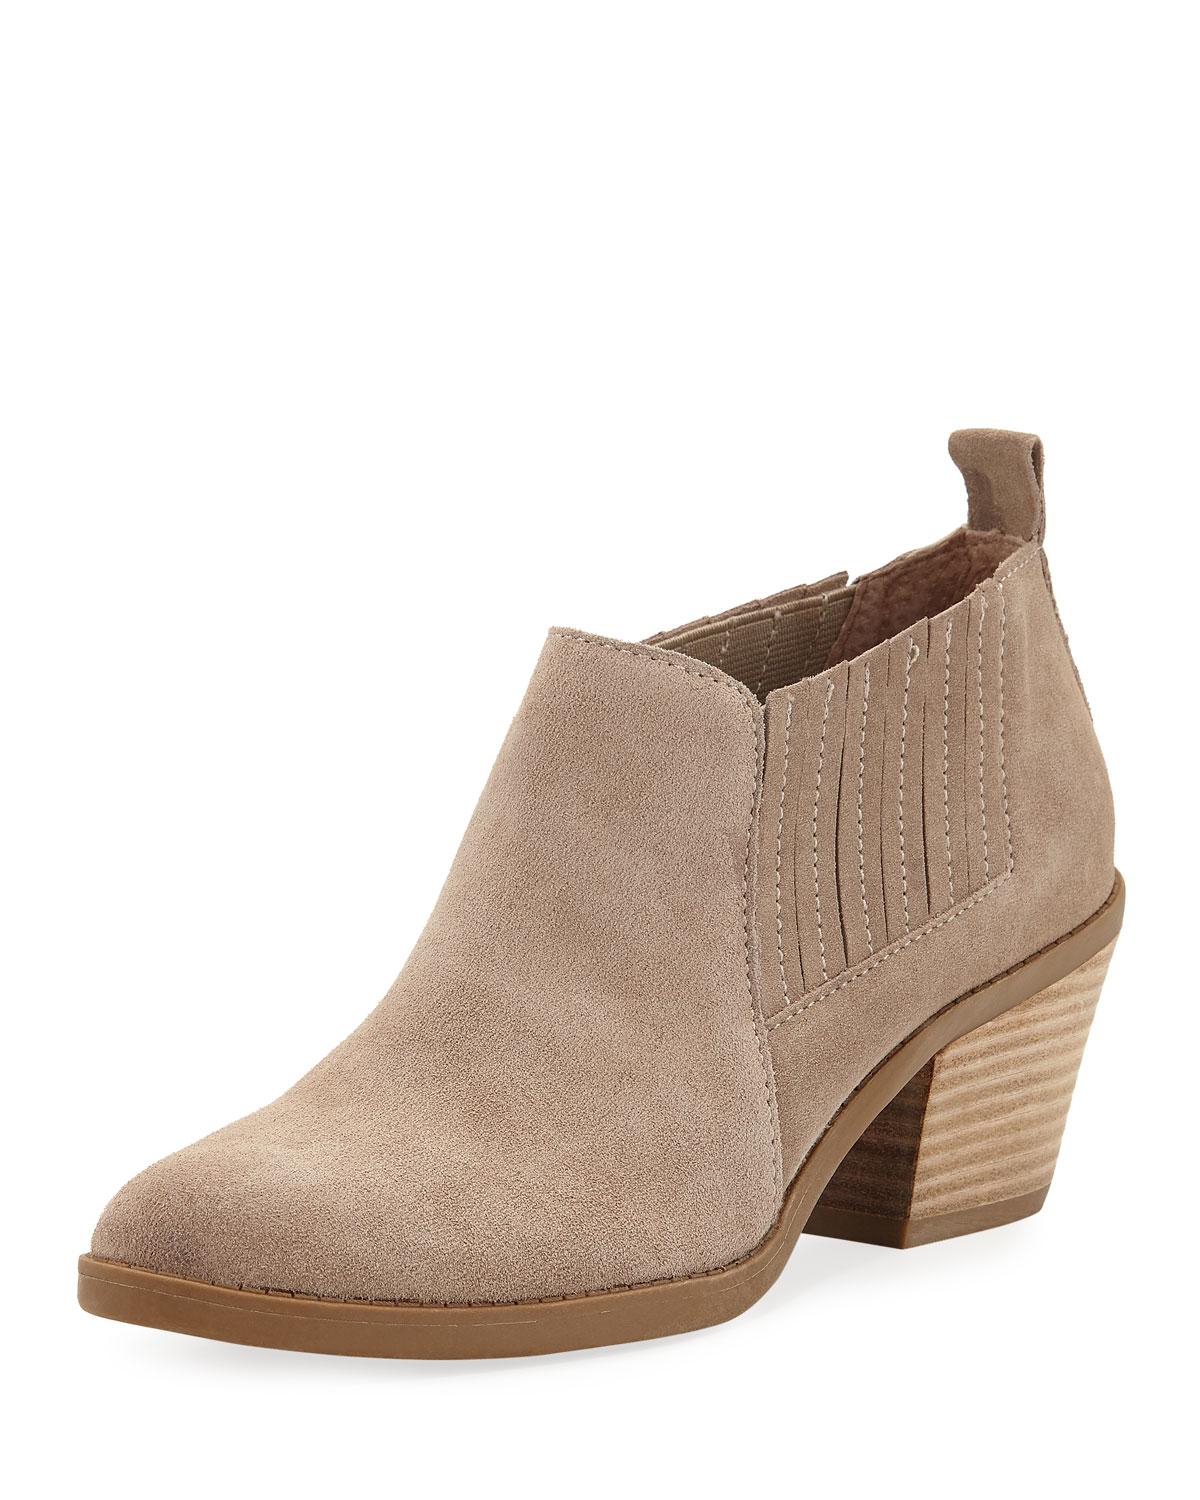 Dolce Vita Suede Elfy Twin Gore Booties 